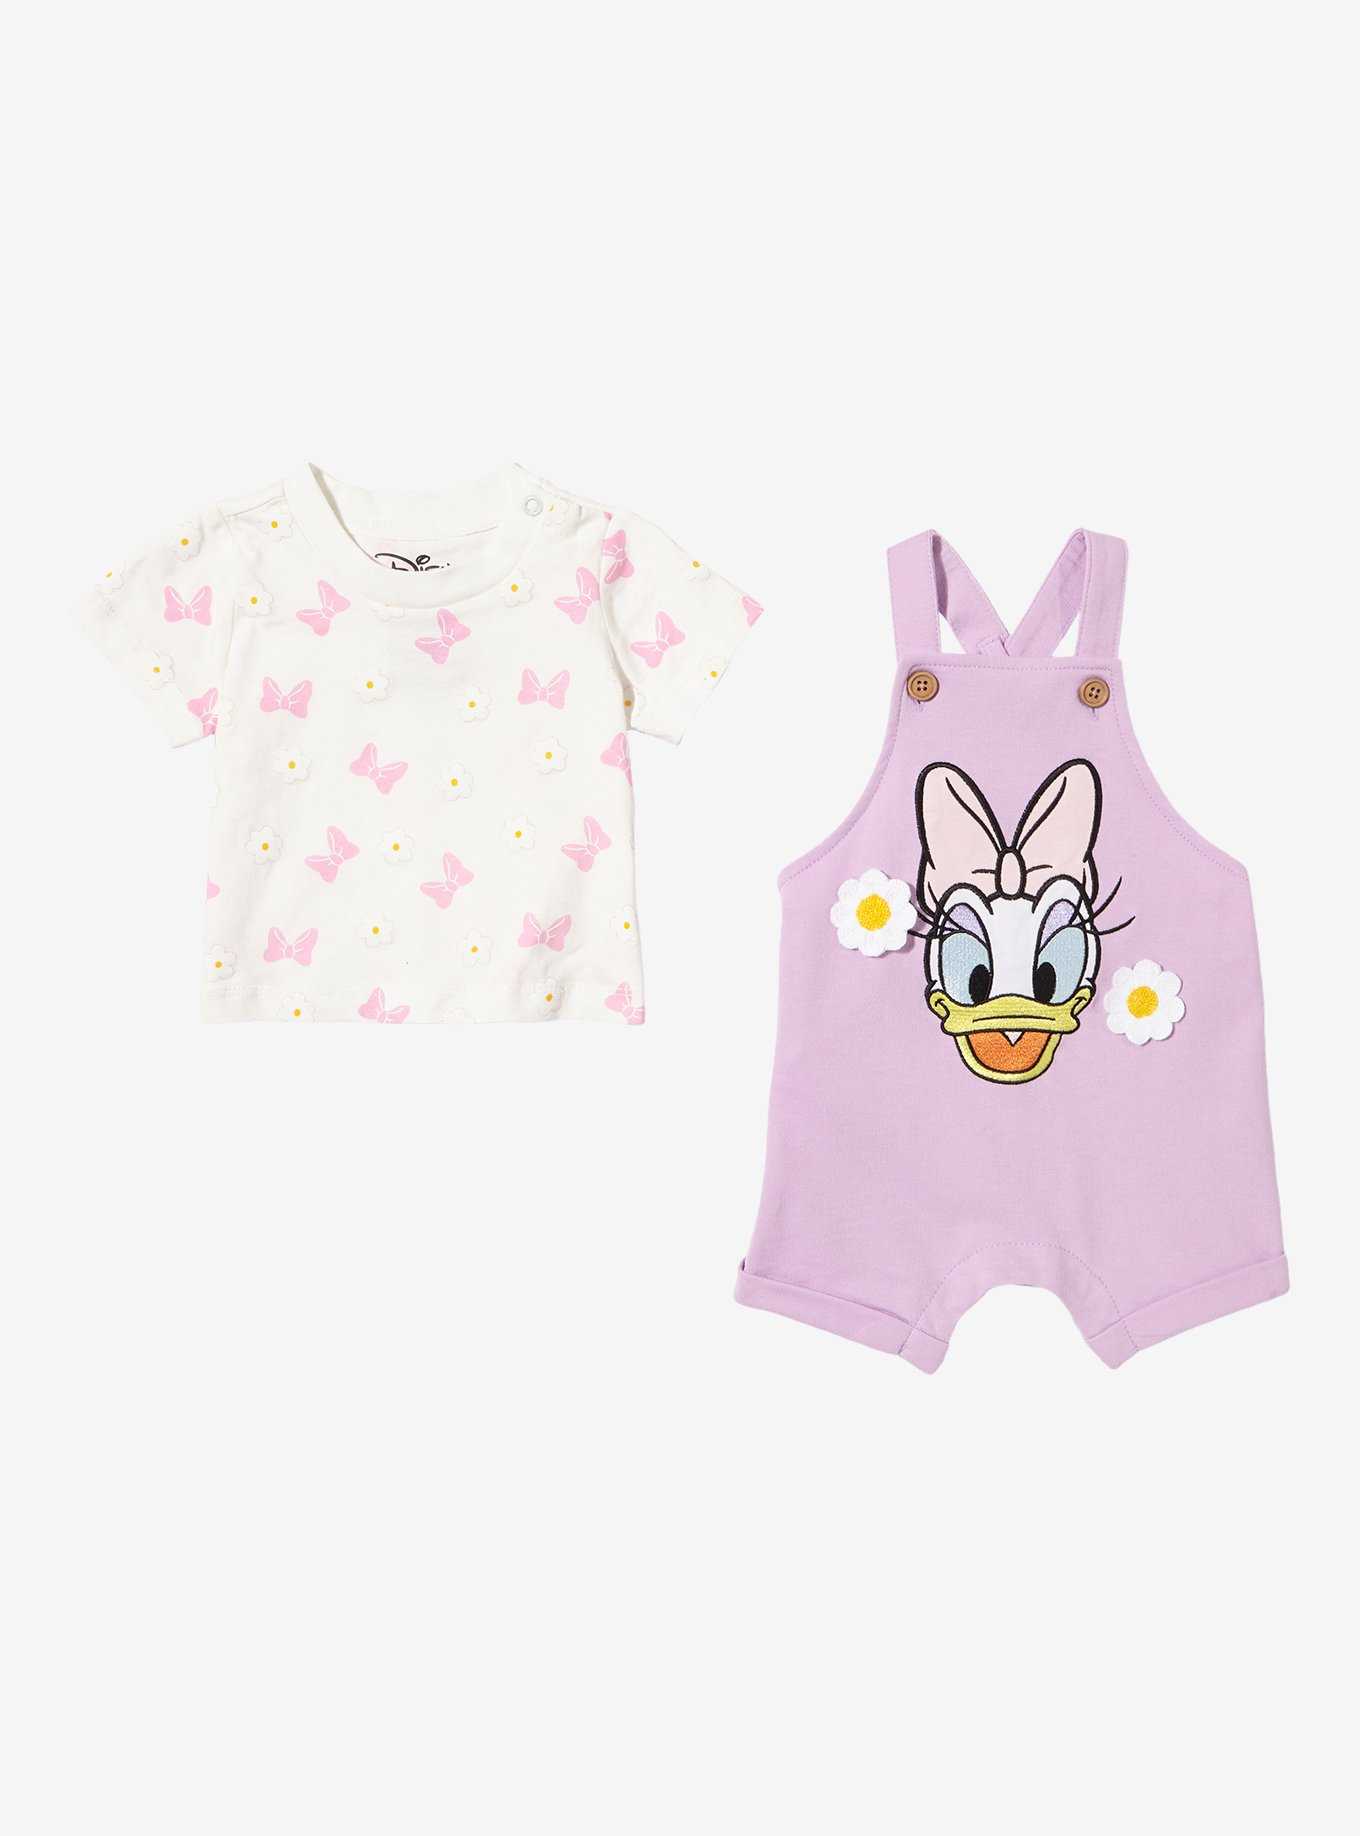 Disney Daisy Duck Infant Overall Set - BoxLunch Exclusive, , hi-res